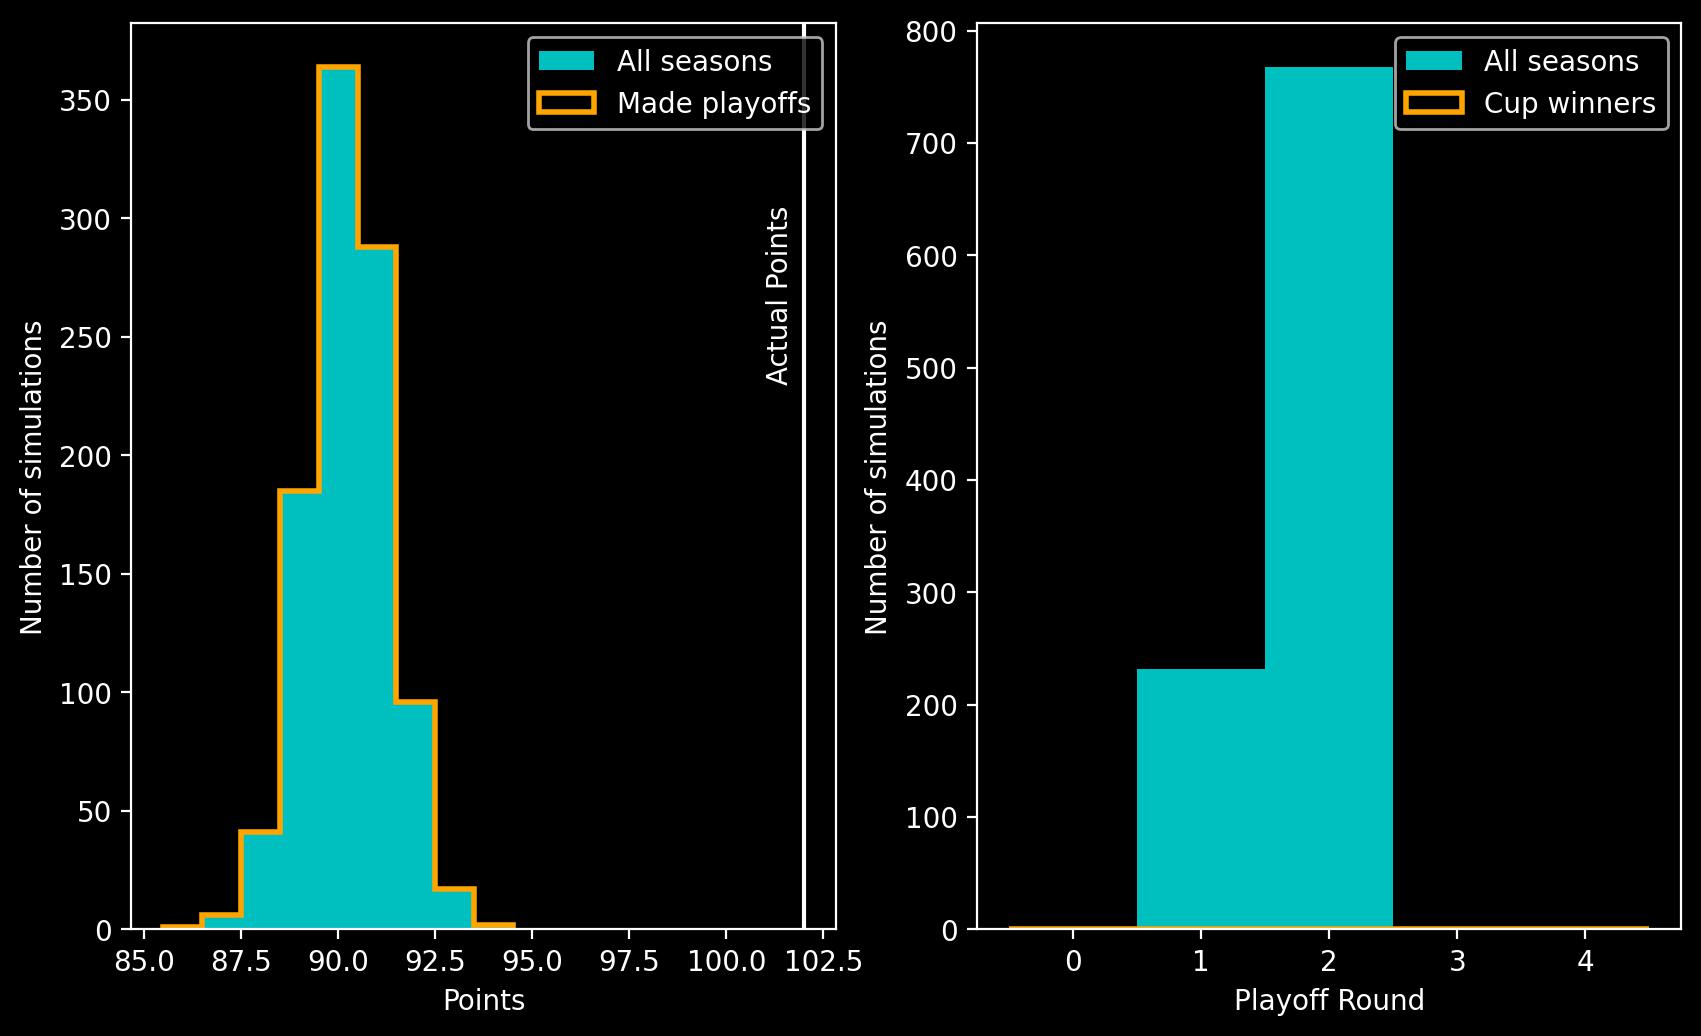 Two panel plot showing histograms. Left panel shows a histogram of points on the x-axis against number of simulations on the y-axis, the peak is at 90 points. Right panel shows playoff round on the x-axis against number of simulations on the y-axis. The largest bar is at playoff round 2.